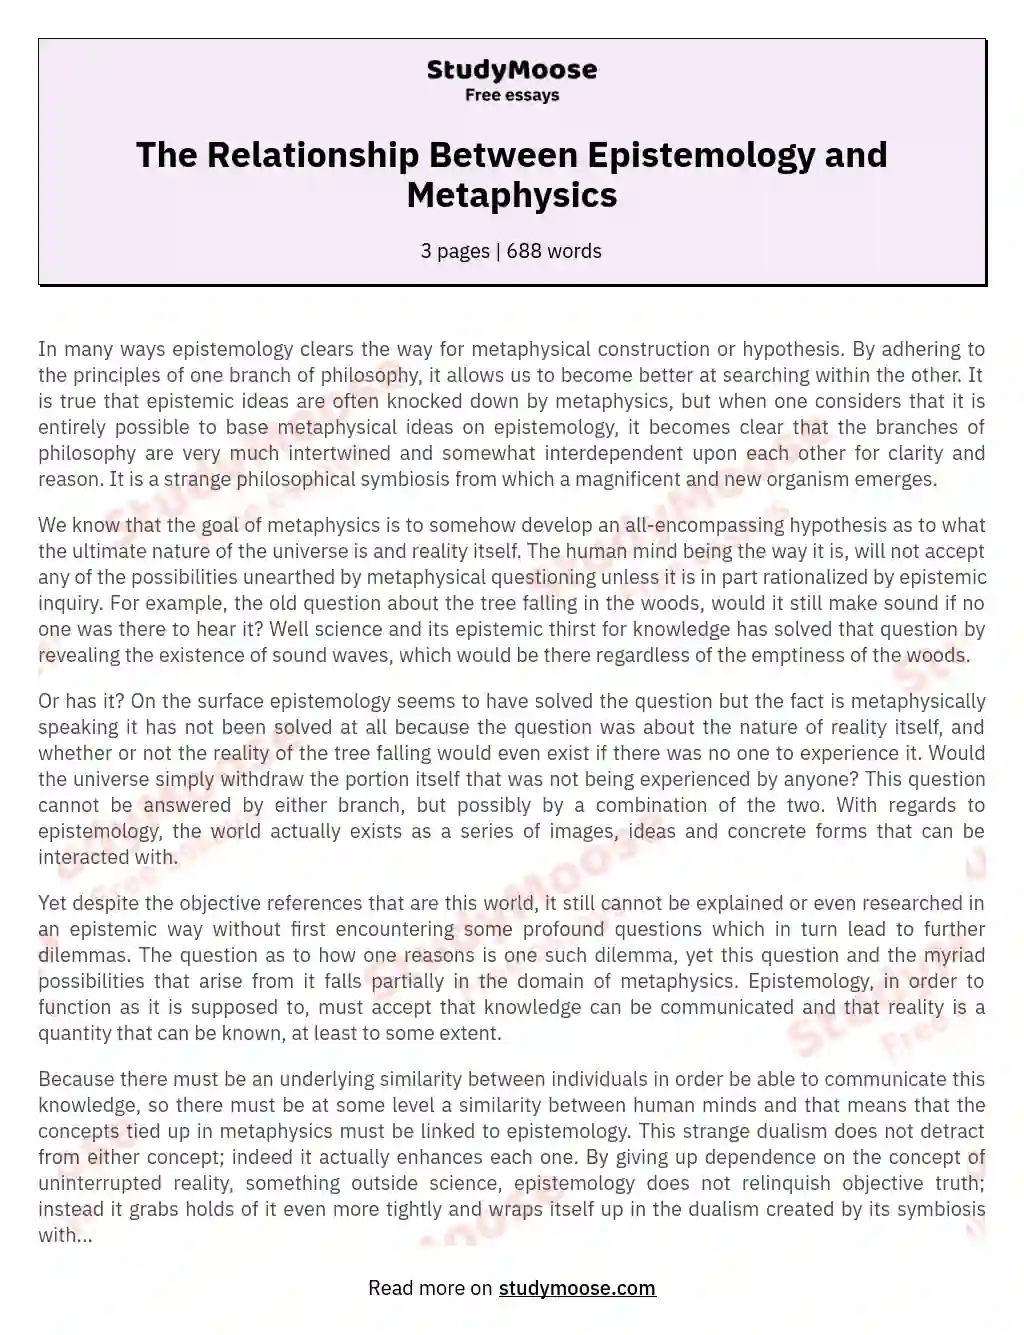 The Relationship Between Epistemology and Metaphysics essay